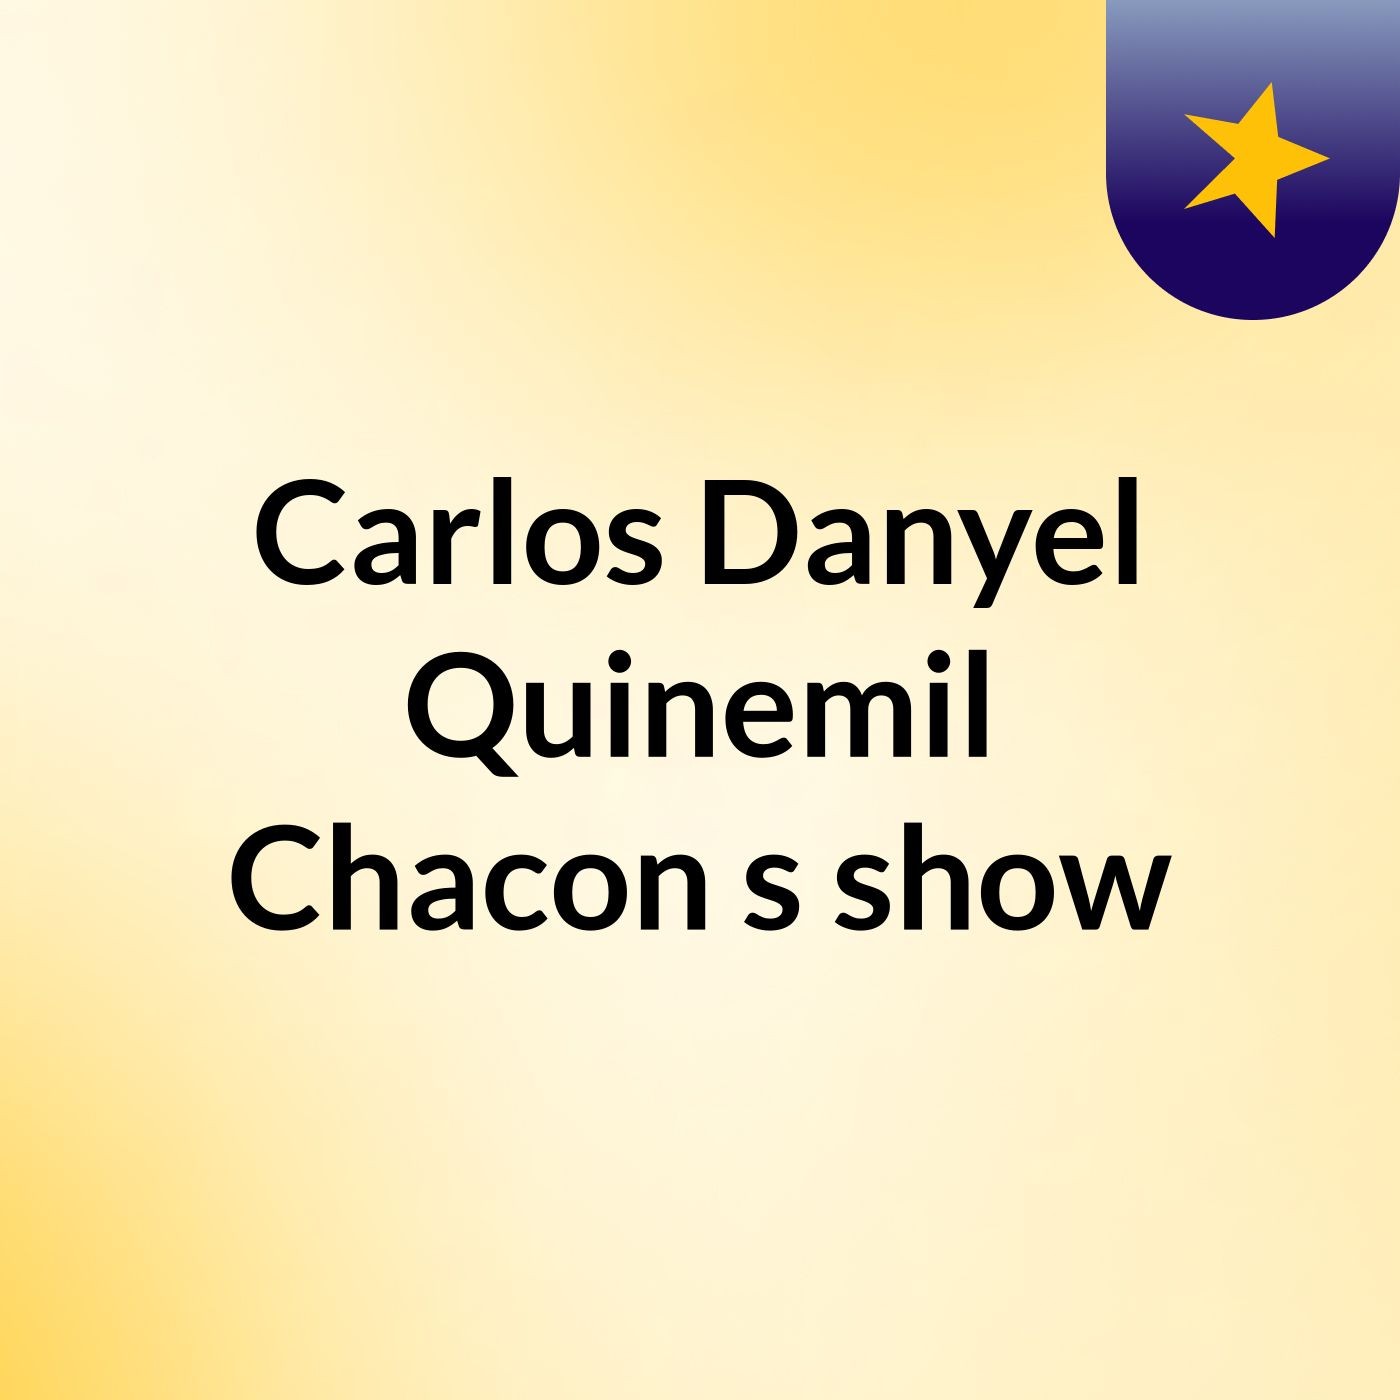 Carlos Danyel Quinemil Chacon's show